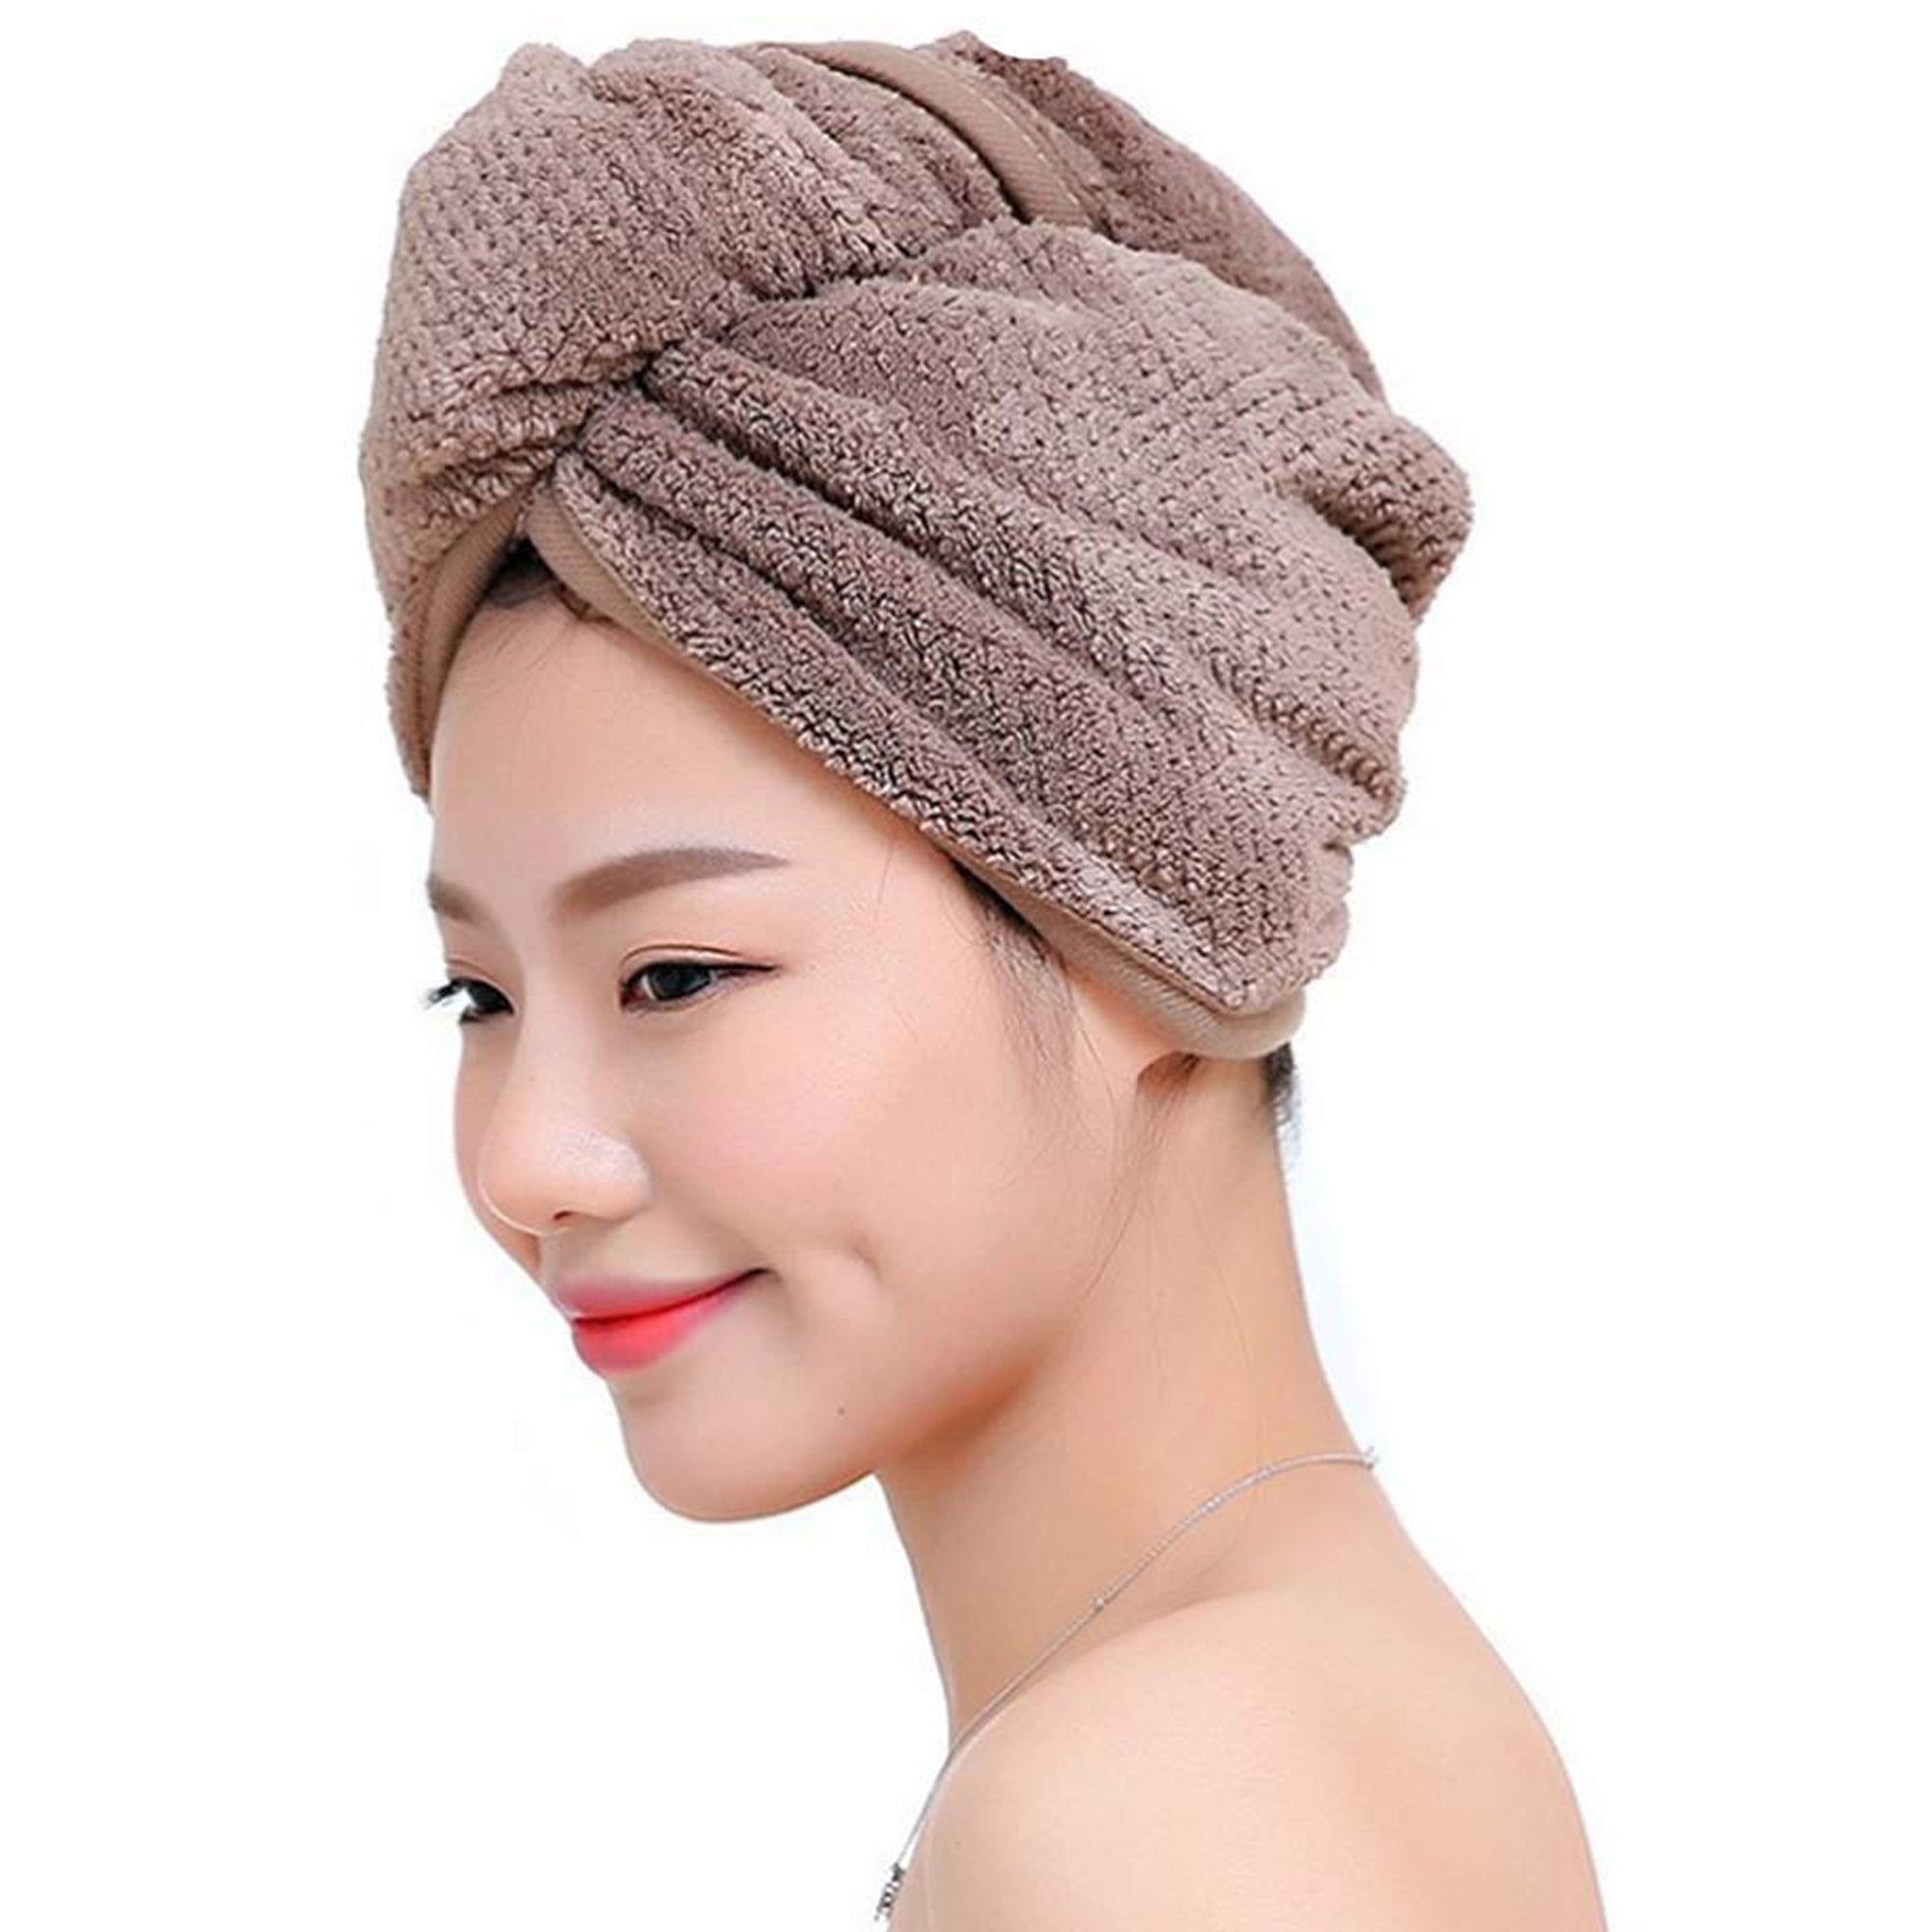 BLACK 100% Cotton After Shower Hair Drying Wrap Towel Quick Dry Hair Hat Cap Turban